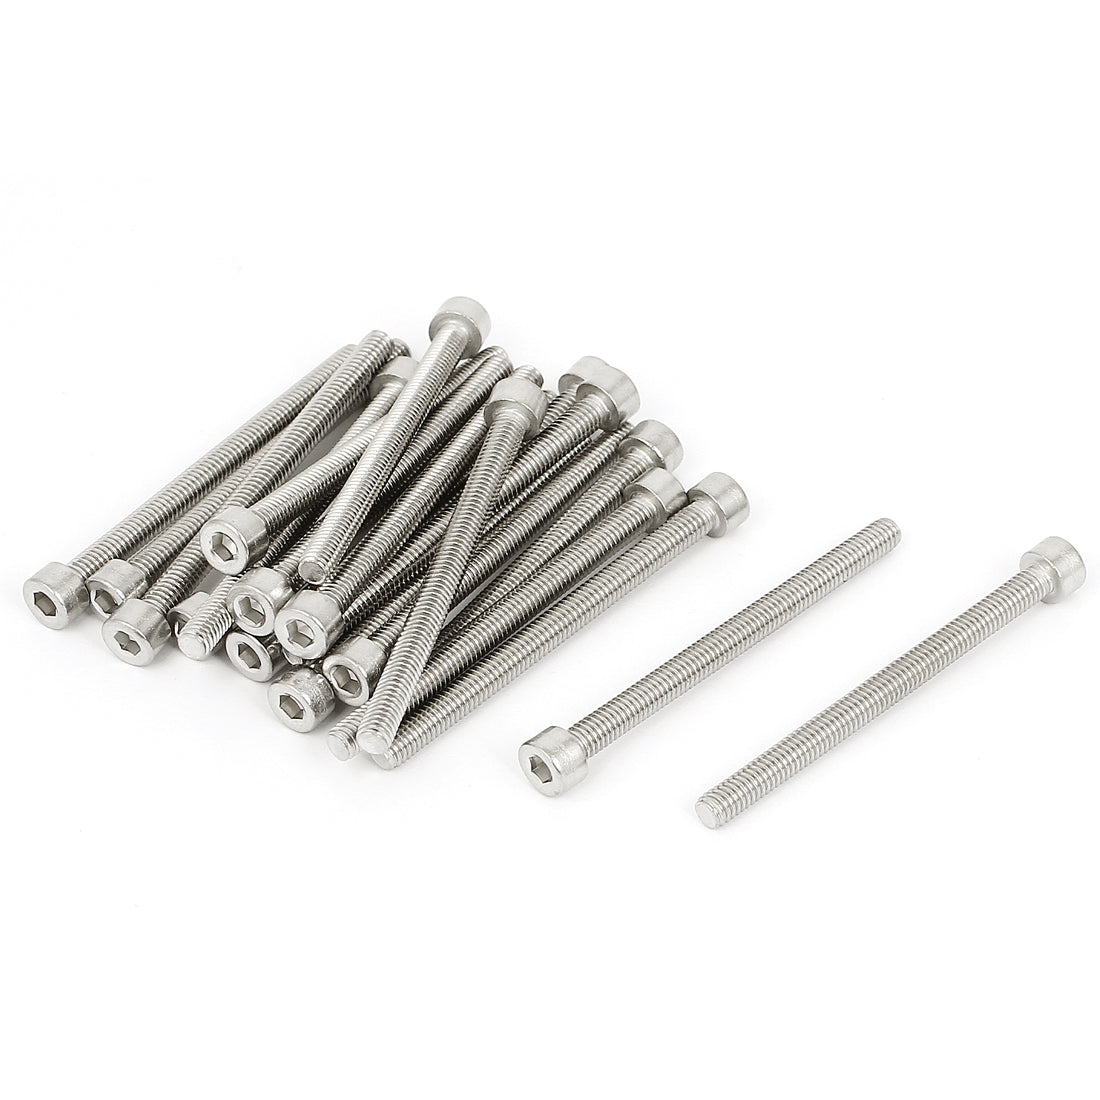 uxcell Uxcell 20 Pcs 54mm Long 4mmx50mm Stainless Steel Hex Socket Head Cap Screws 0.7mm Pitch